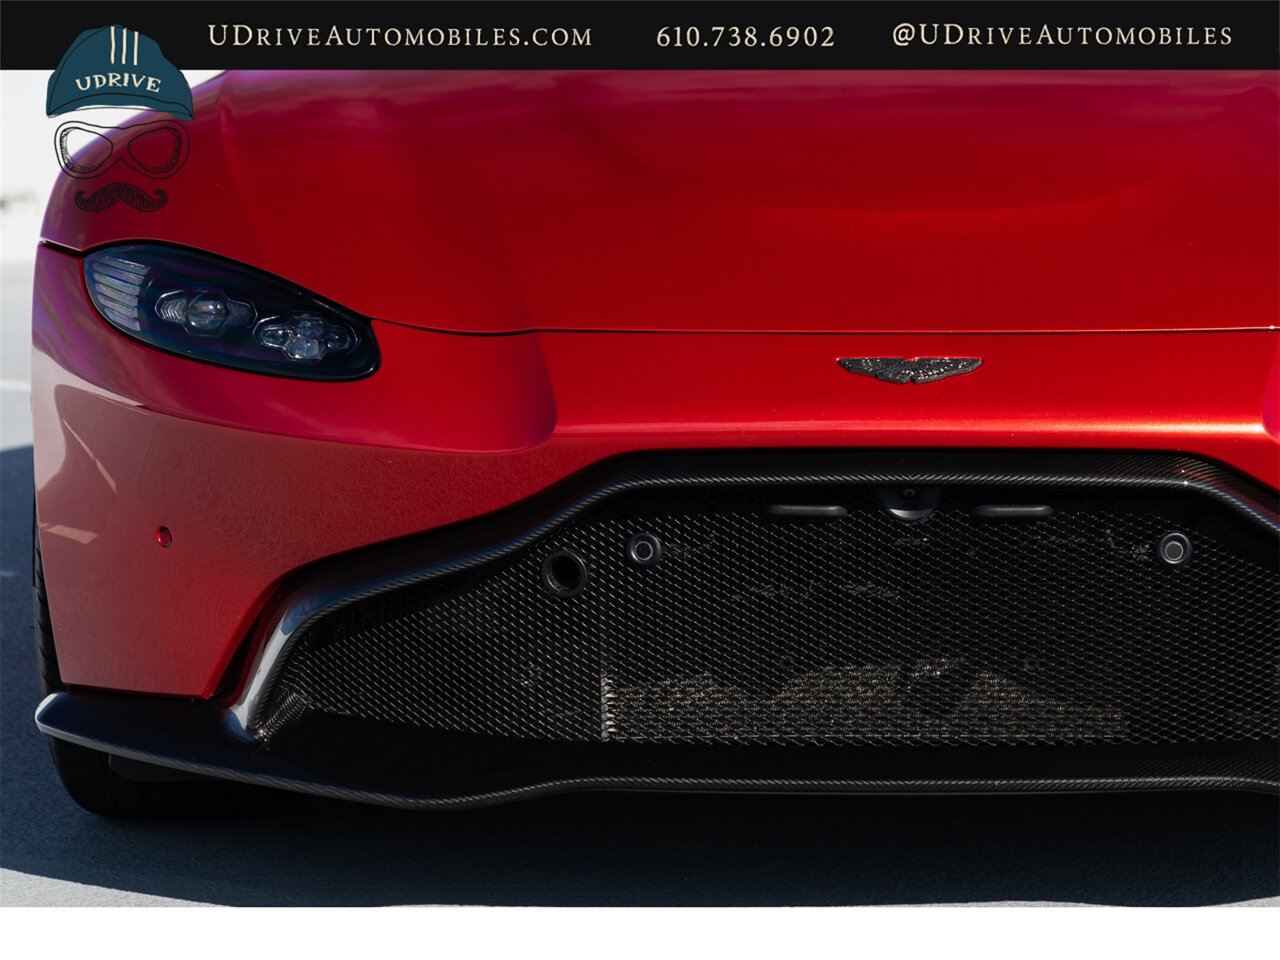 2019 Aston Martin Vantage  Incredibly Spec Rare Q Exclusive Fiamma Red $222k MSRP 1 of a Kind CPO - Photo 16 - West Chester, PA 19382